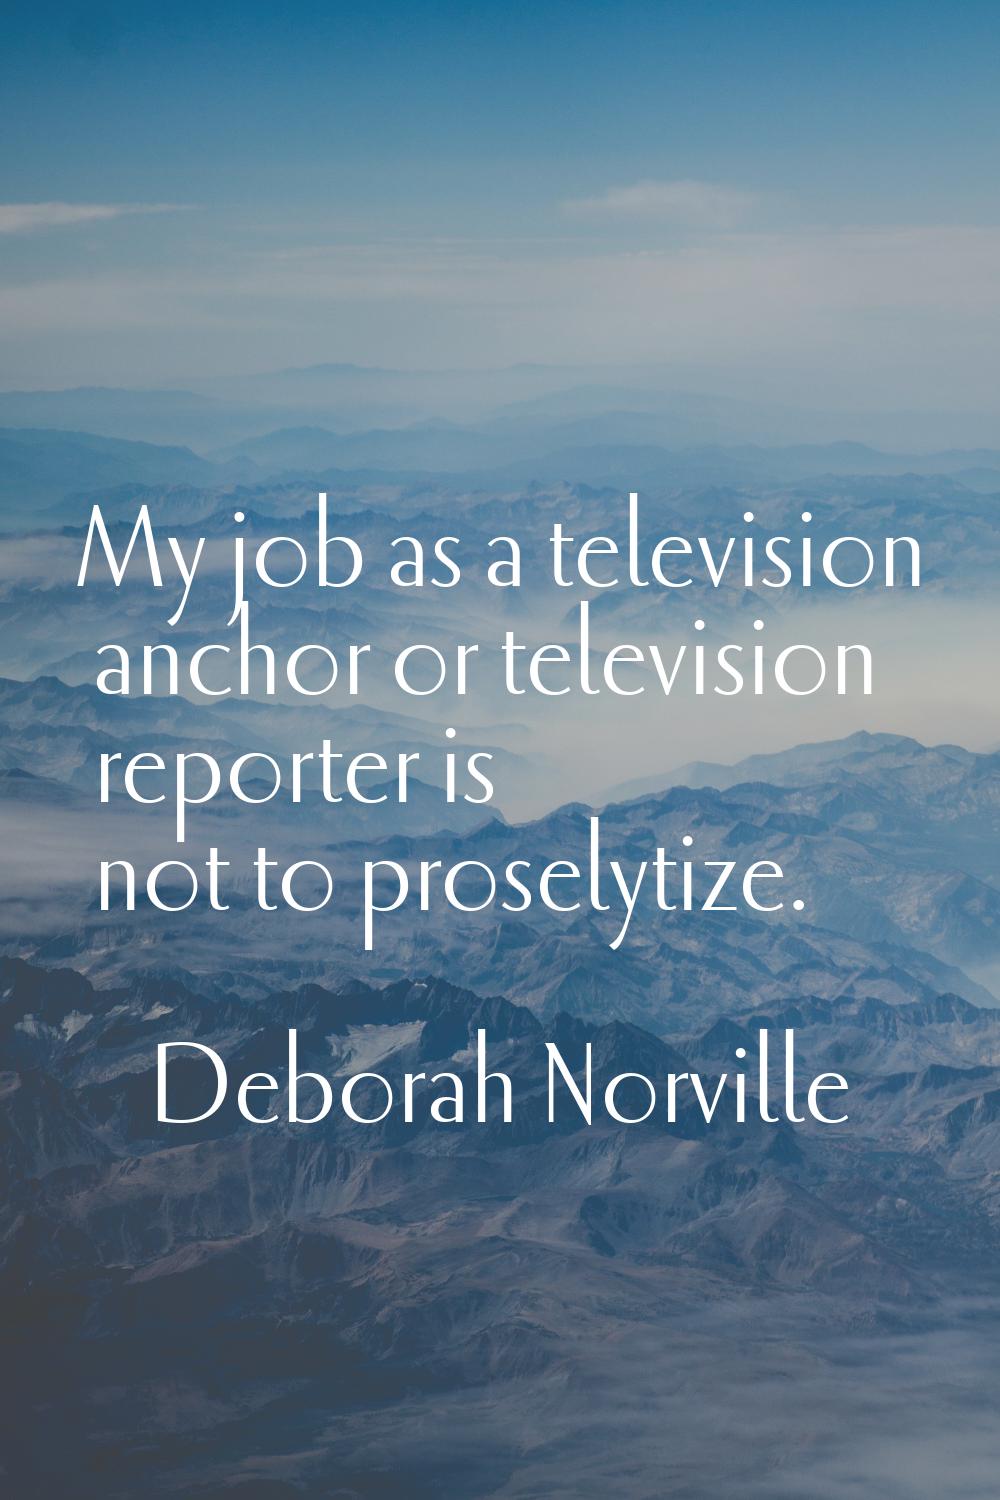 My job as a television anchor or television reporter is not to proselytize.